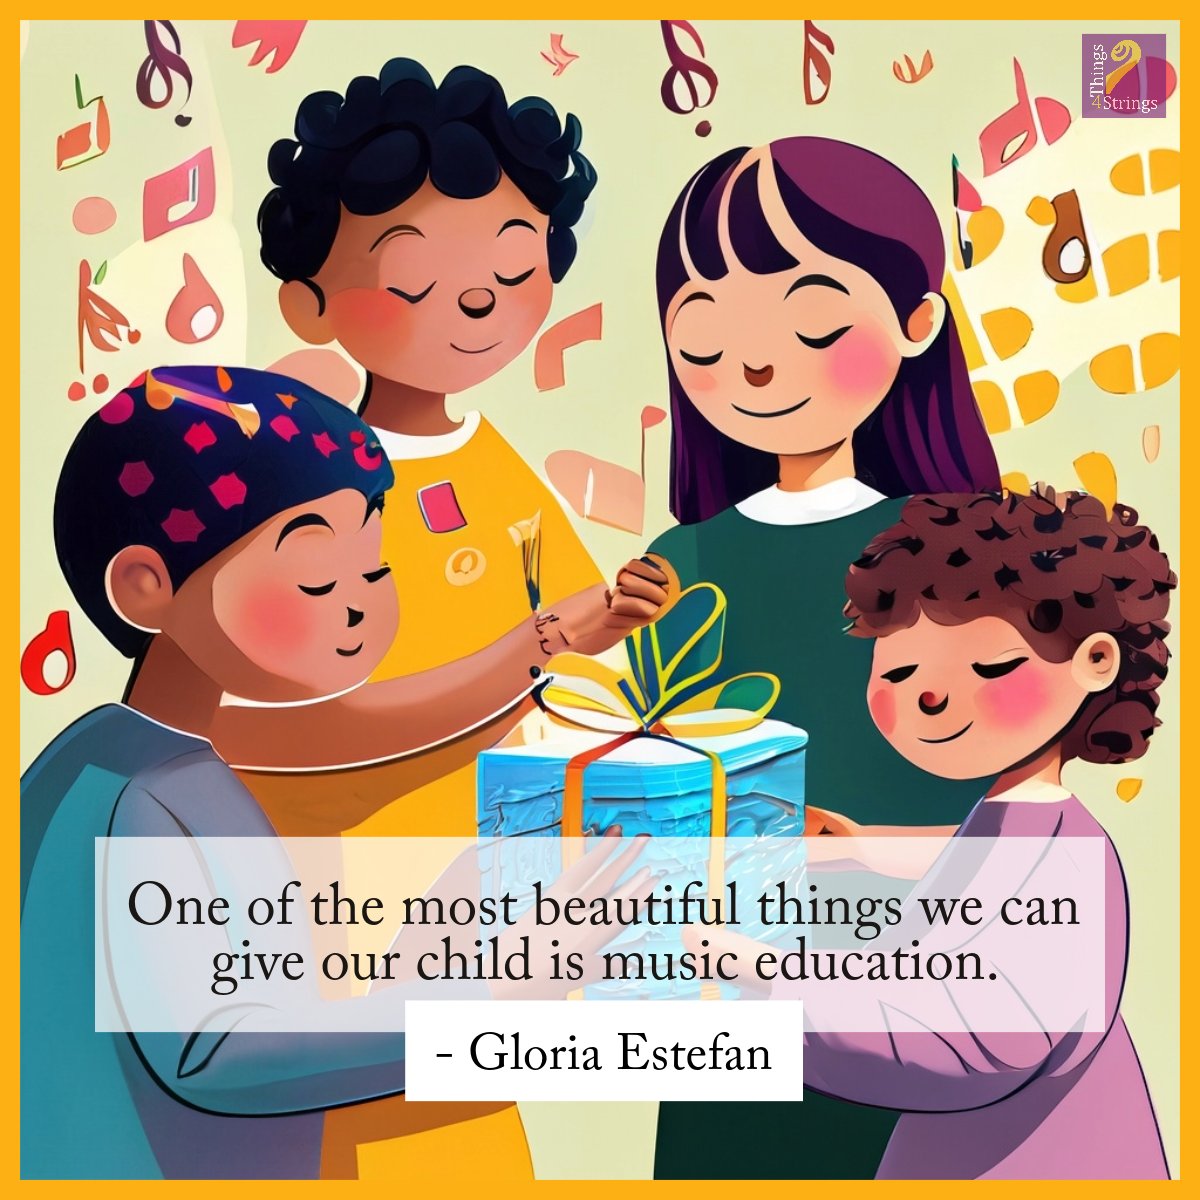 Music education is a gift that lasts a lifetime. #GloriaEstefan #MusicEducation Gloria Estefan, a Cuban-American singer, is a highly acclaimed artist. She's won numerous awards, including 8 Grammys & the Presidential Medal of Freedom. She's among the top-selling female singers.